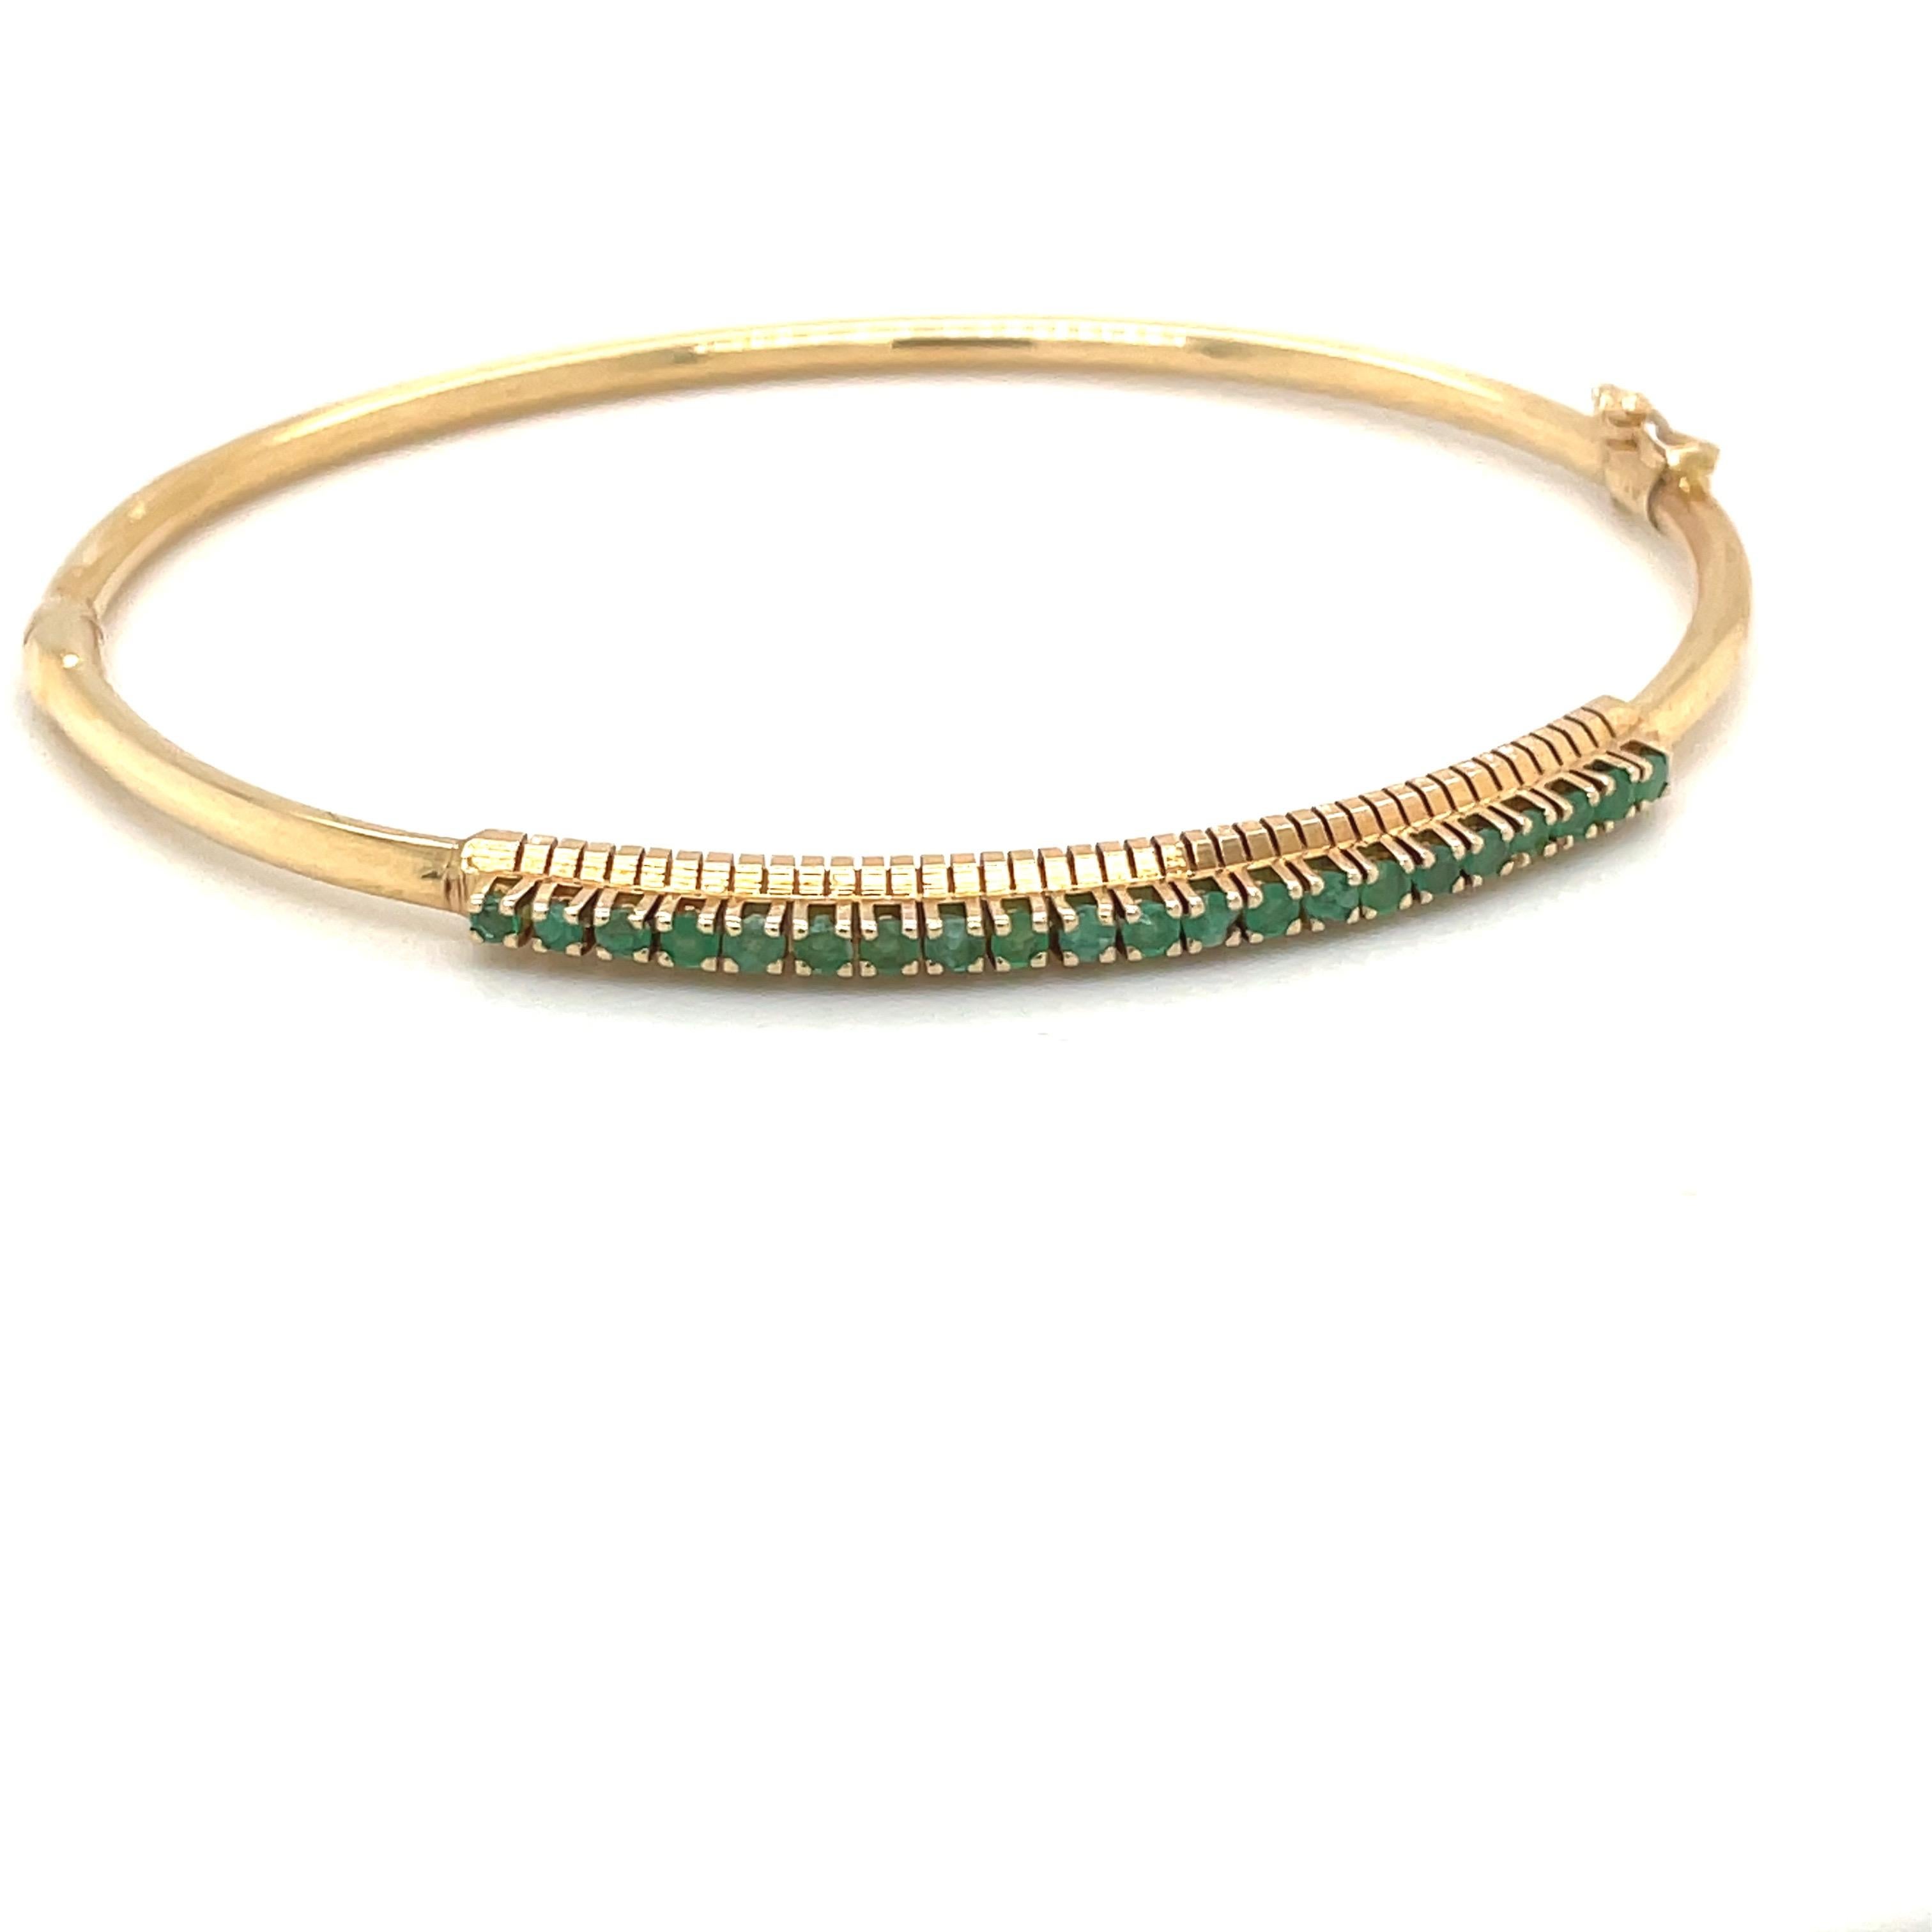 A 14 karat yellow gold bangle bracelet with a single row of prong set  round emeralds. The hinged bracelet measures 2.5